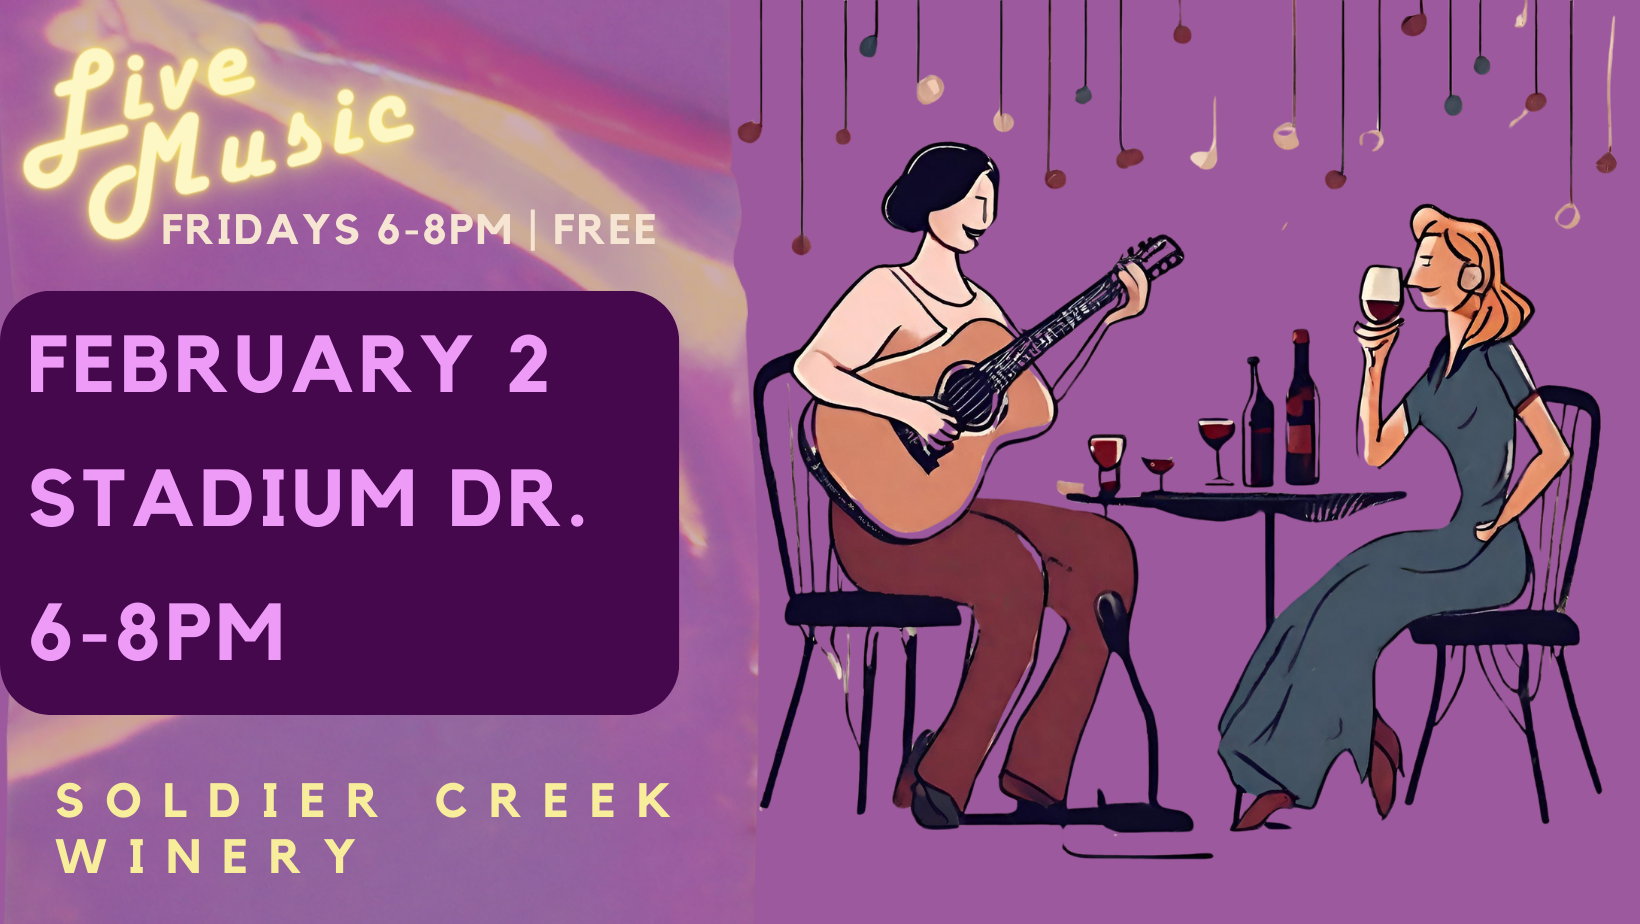 free, live music every friday at soldier creek winery. february 2 is stadium dr from 6-8pm. free to listen.